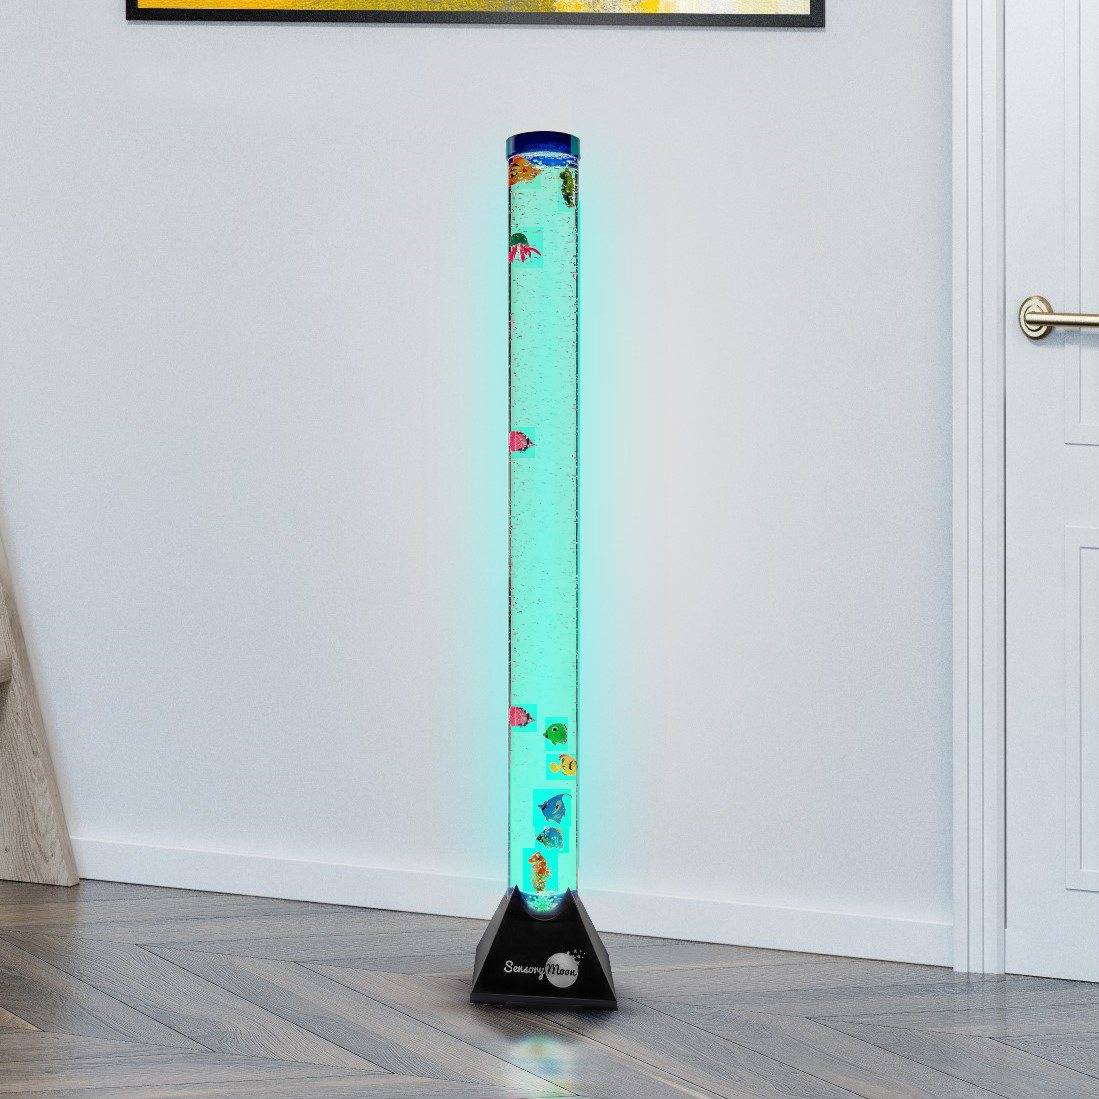 SensoryMoon 3ft Sensory Bubble Tower Lamp w Fake Swimming Plastic Fish Bedrooms 7-Color LED Cycle & Soothing Variable Bubble Stream in Large 90cm Tube: Perfect for Sensory Rooms or Office! Parties